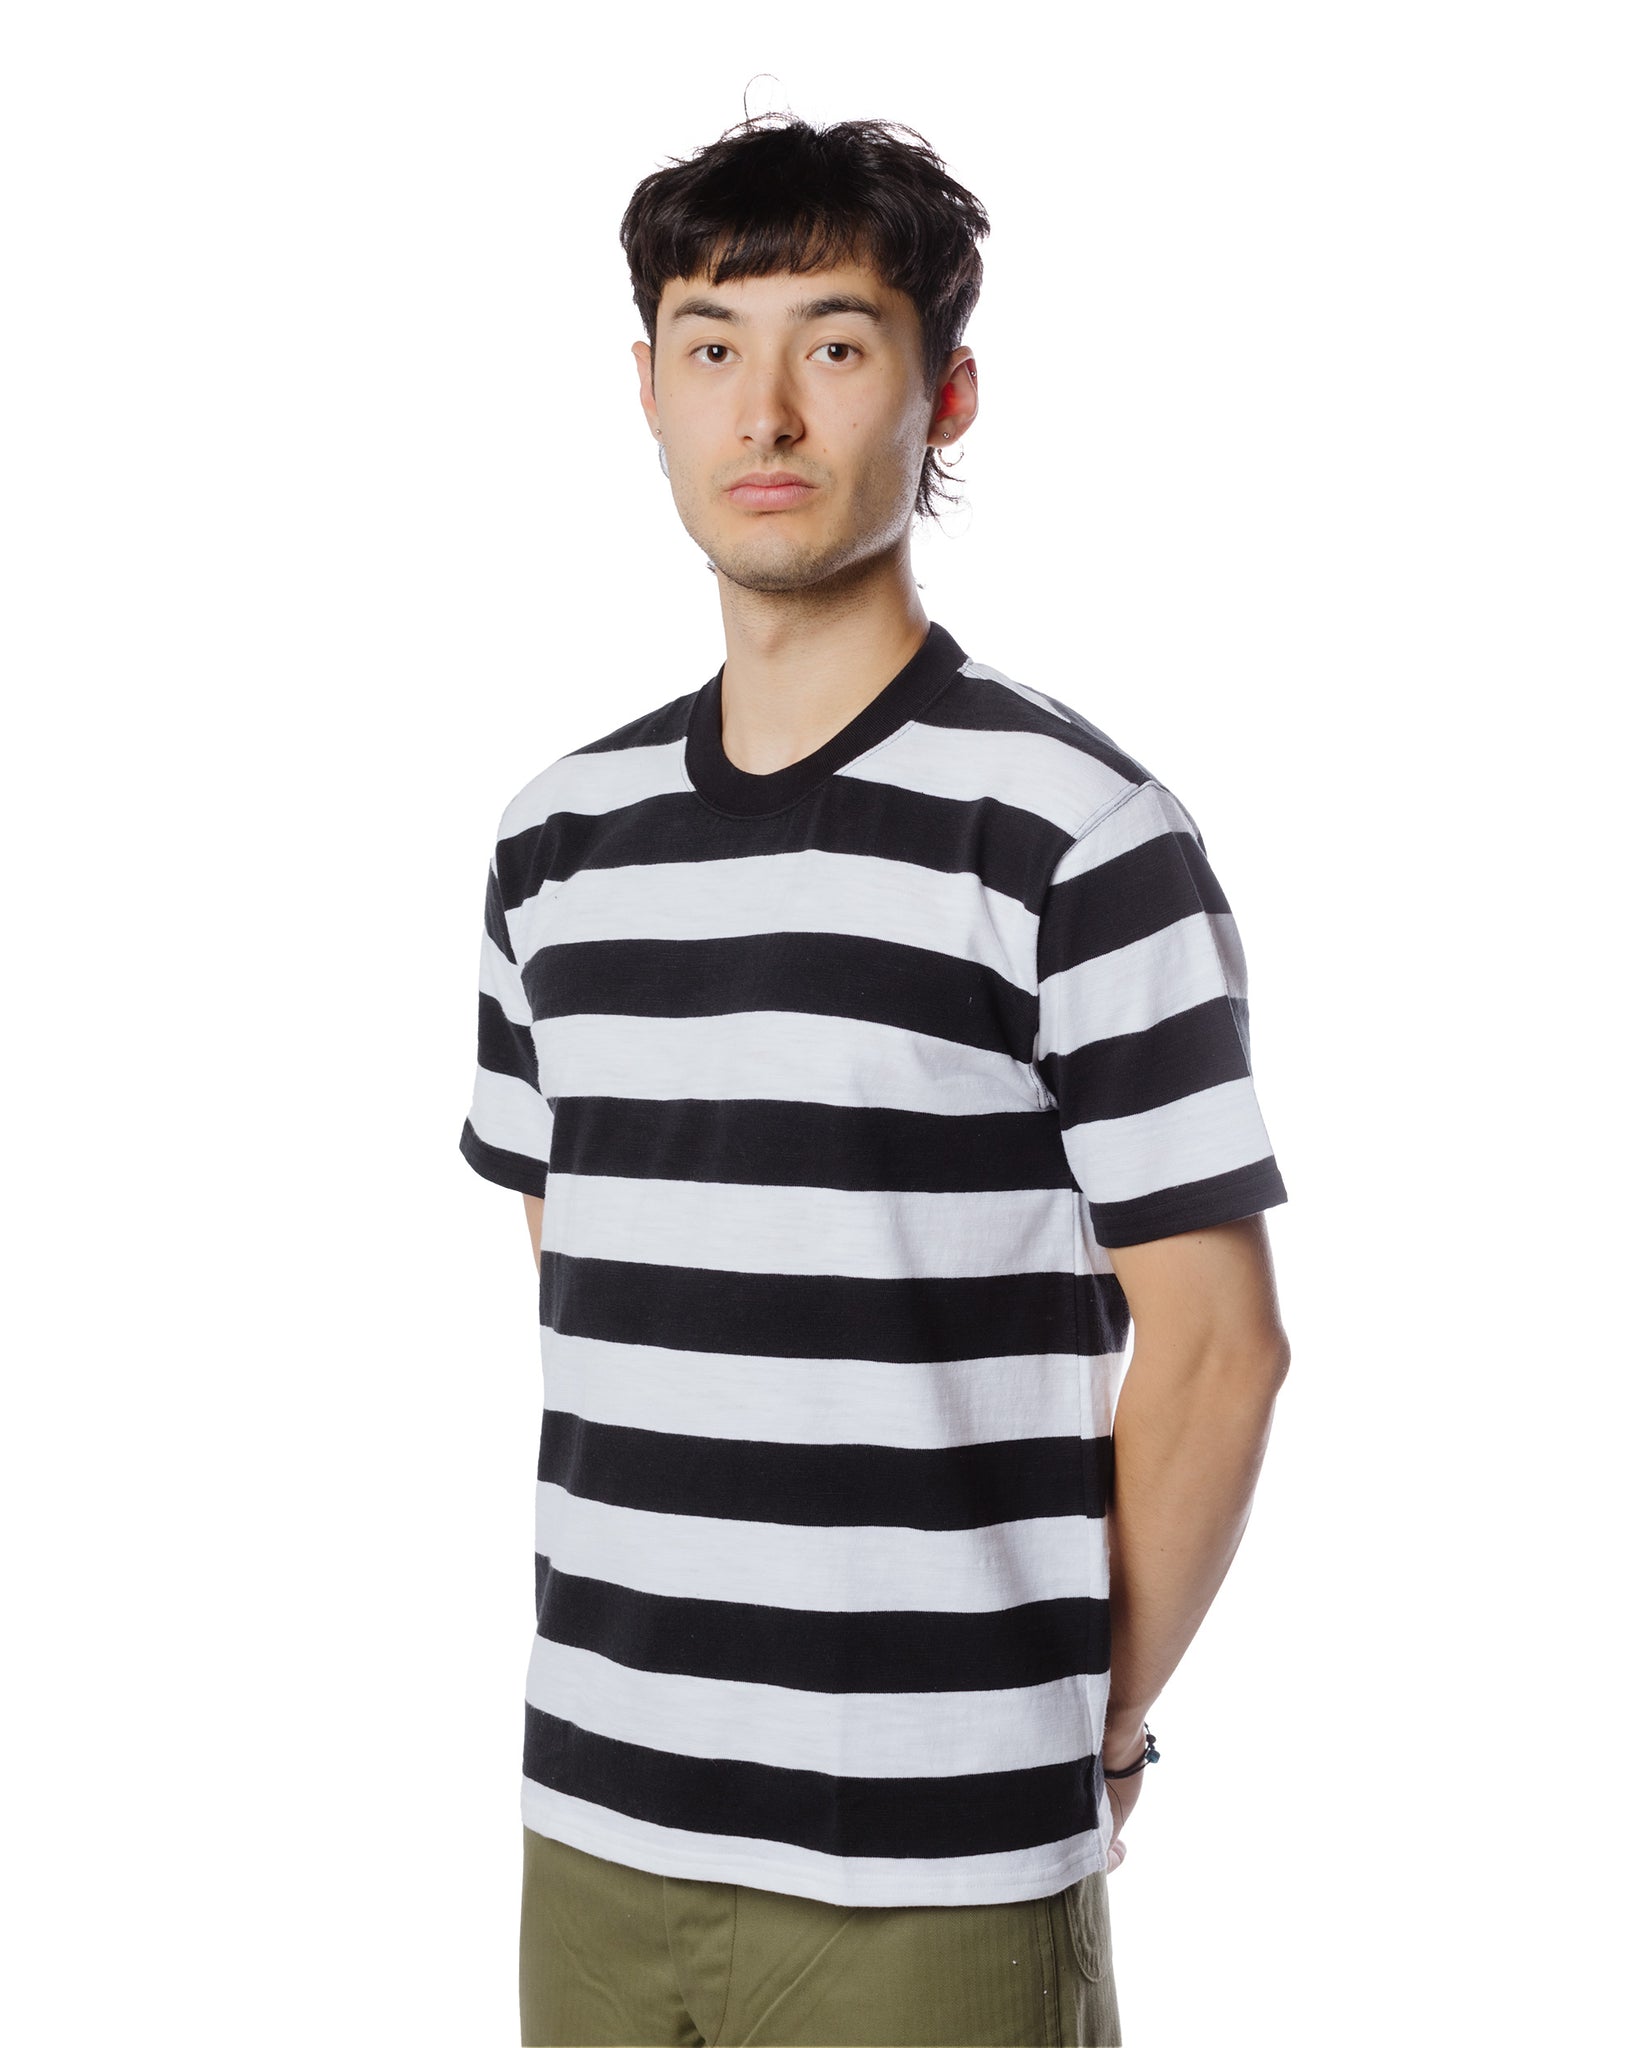 The Real McCoy's BC20007 Buco Stripe Tee S/S White Model Detail